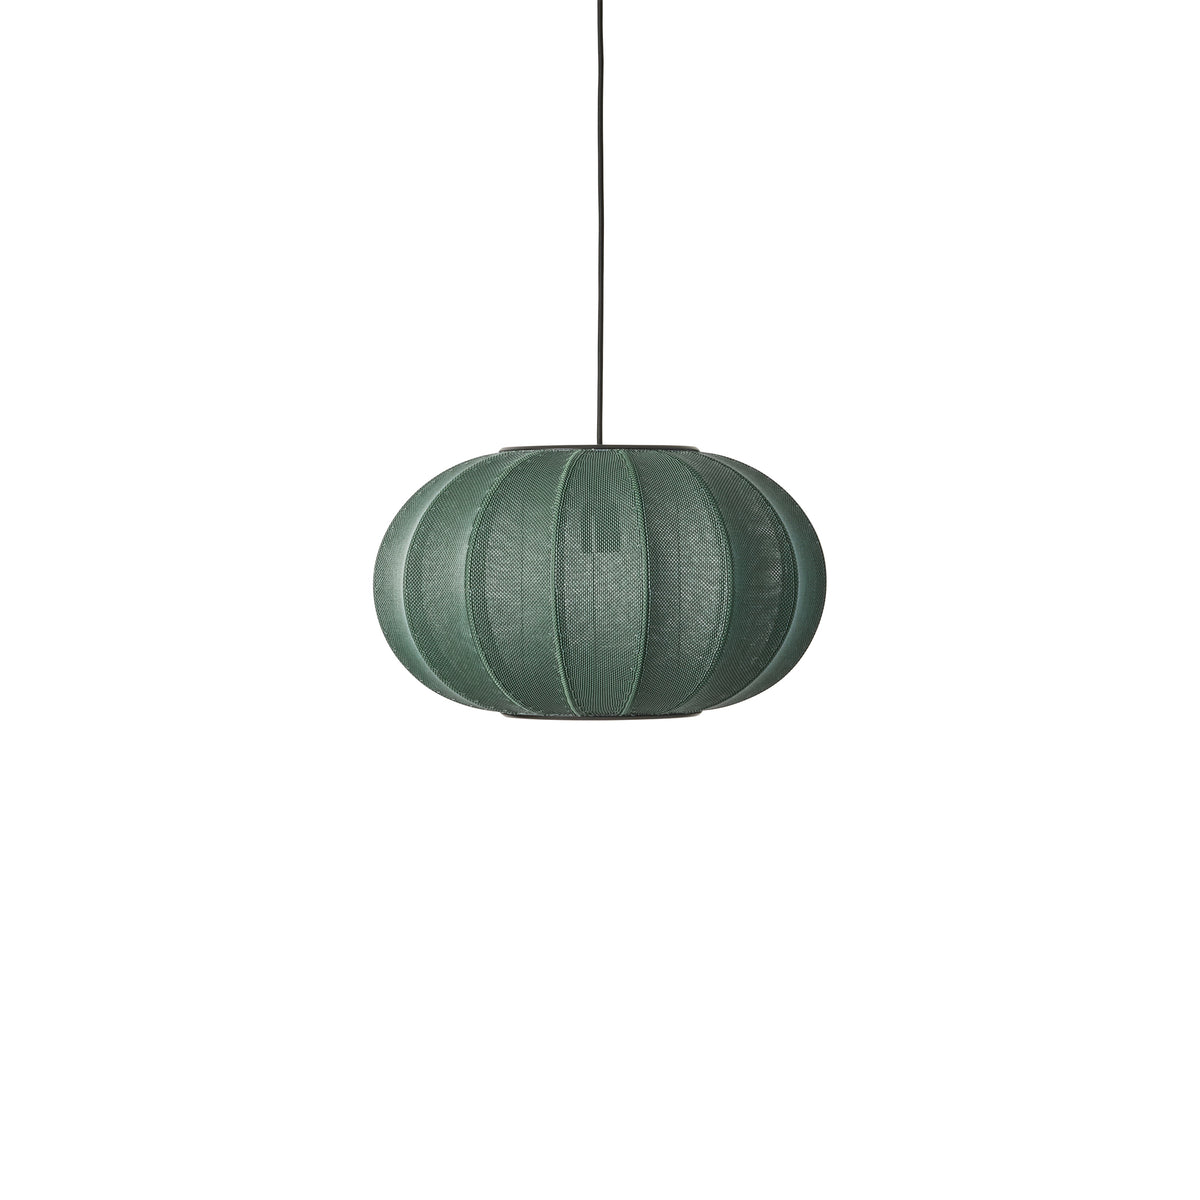 Made by Hand, Knit-Wit Oval Pendant Lamp 45, Tweed Green, Pendant,